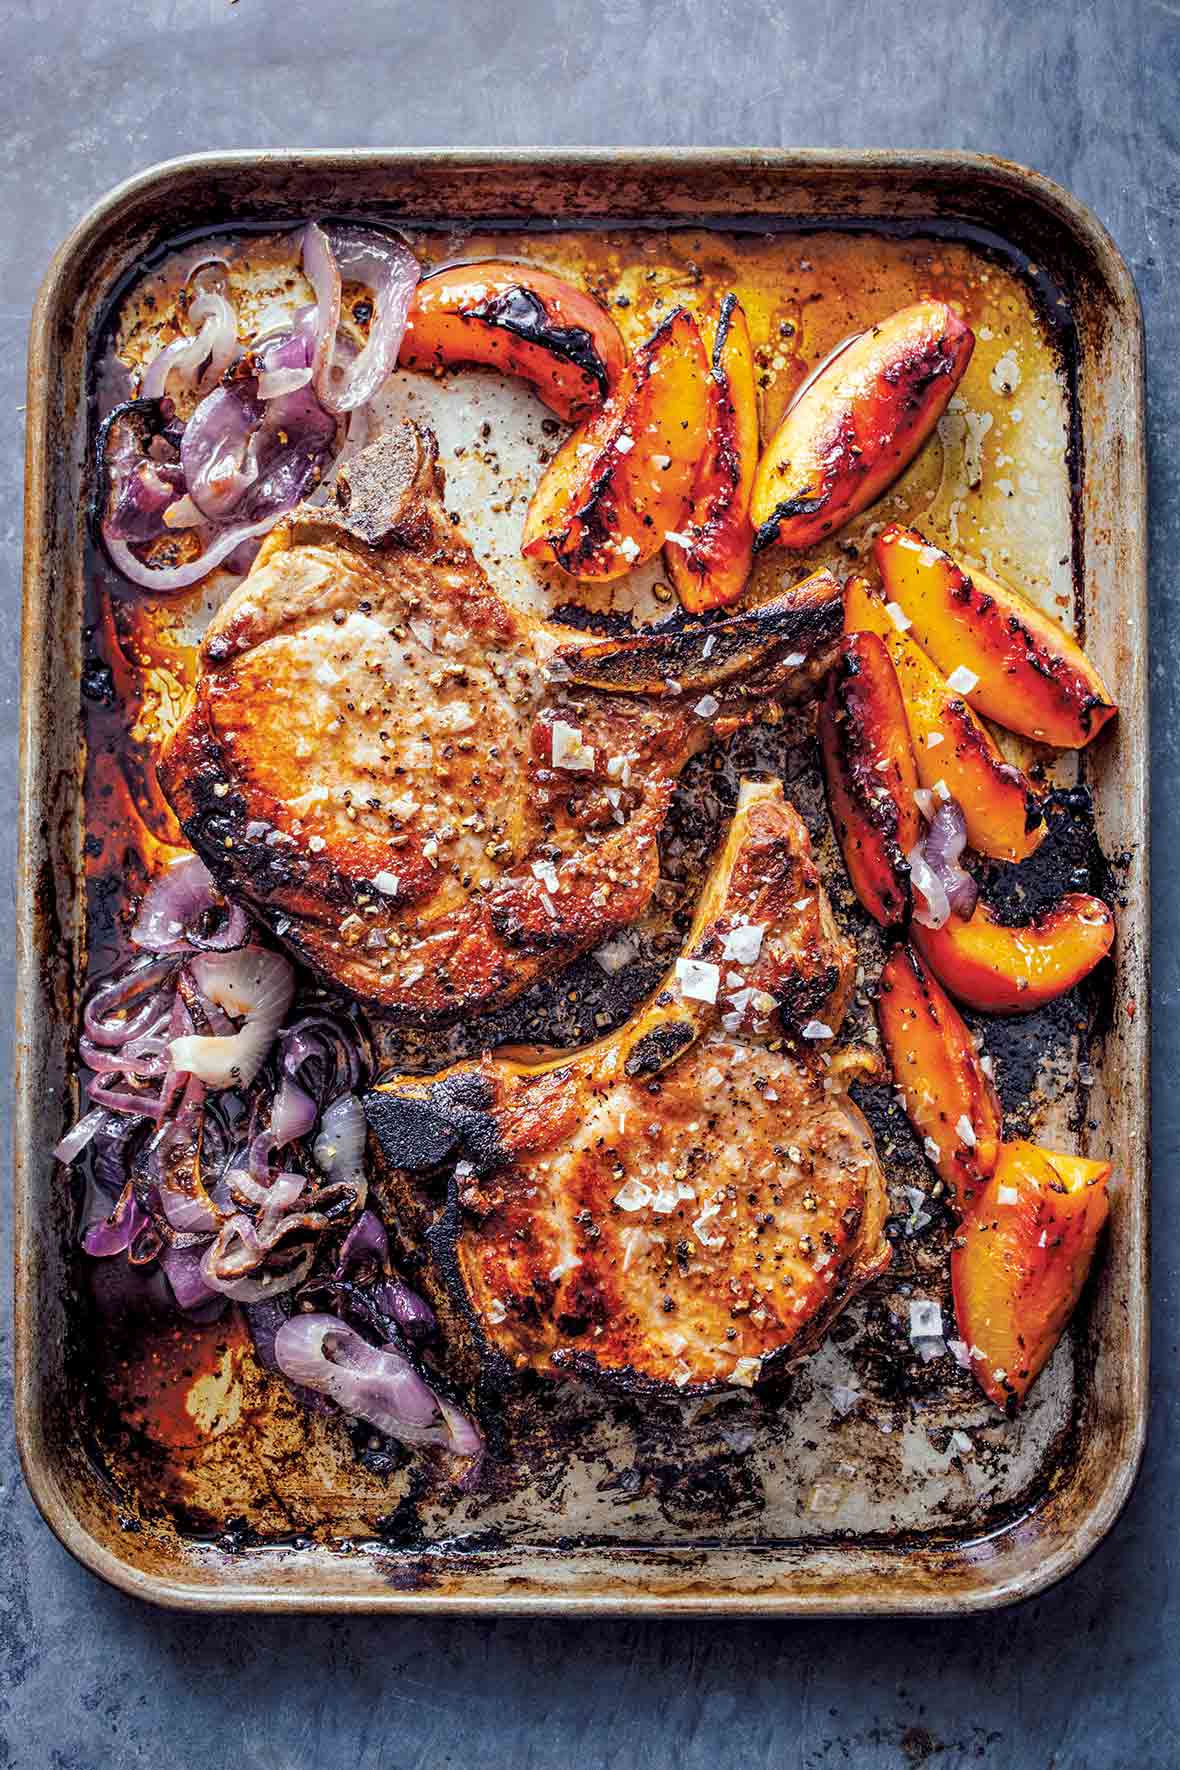 Roast Pork Chops With Peaches Recipe Leite S Culinaria,Value Of Wheat Pennies By Year